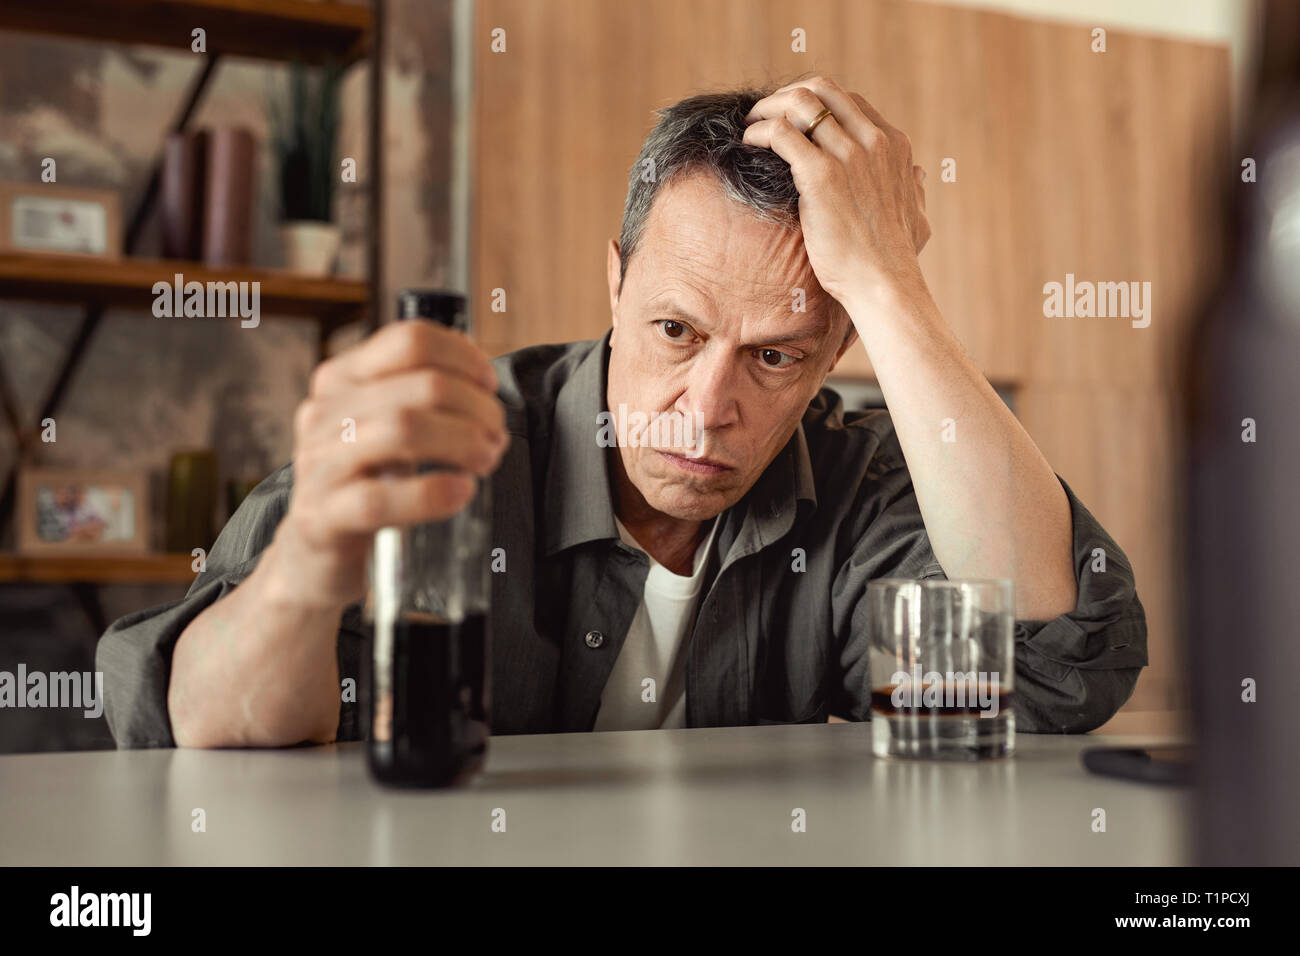 Apathetic short-haired man leaning on his hand and carrying partly-empty bottle Stock Photo